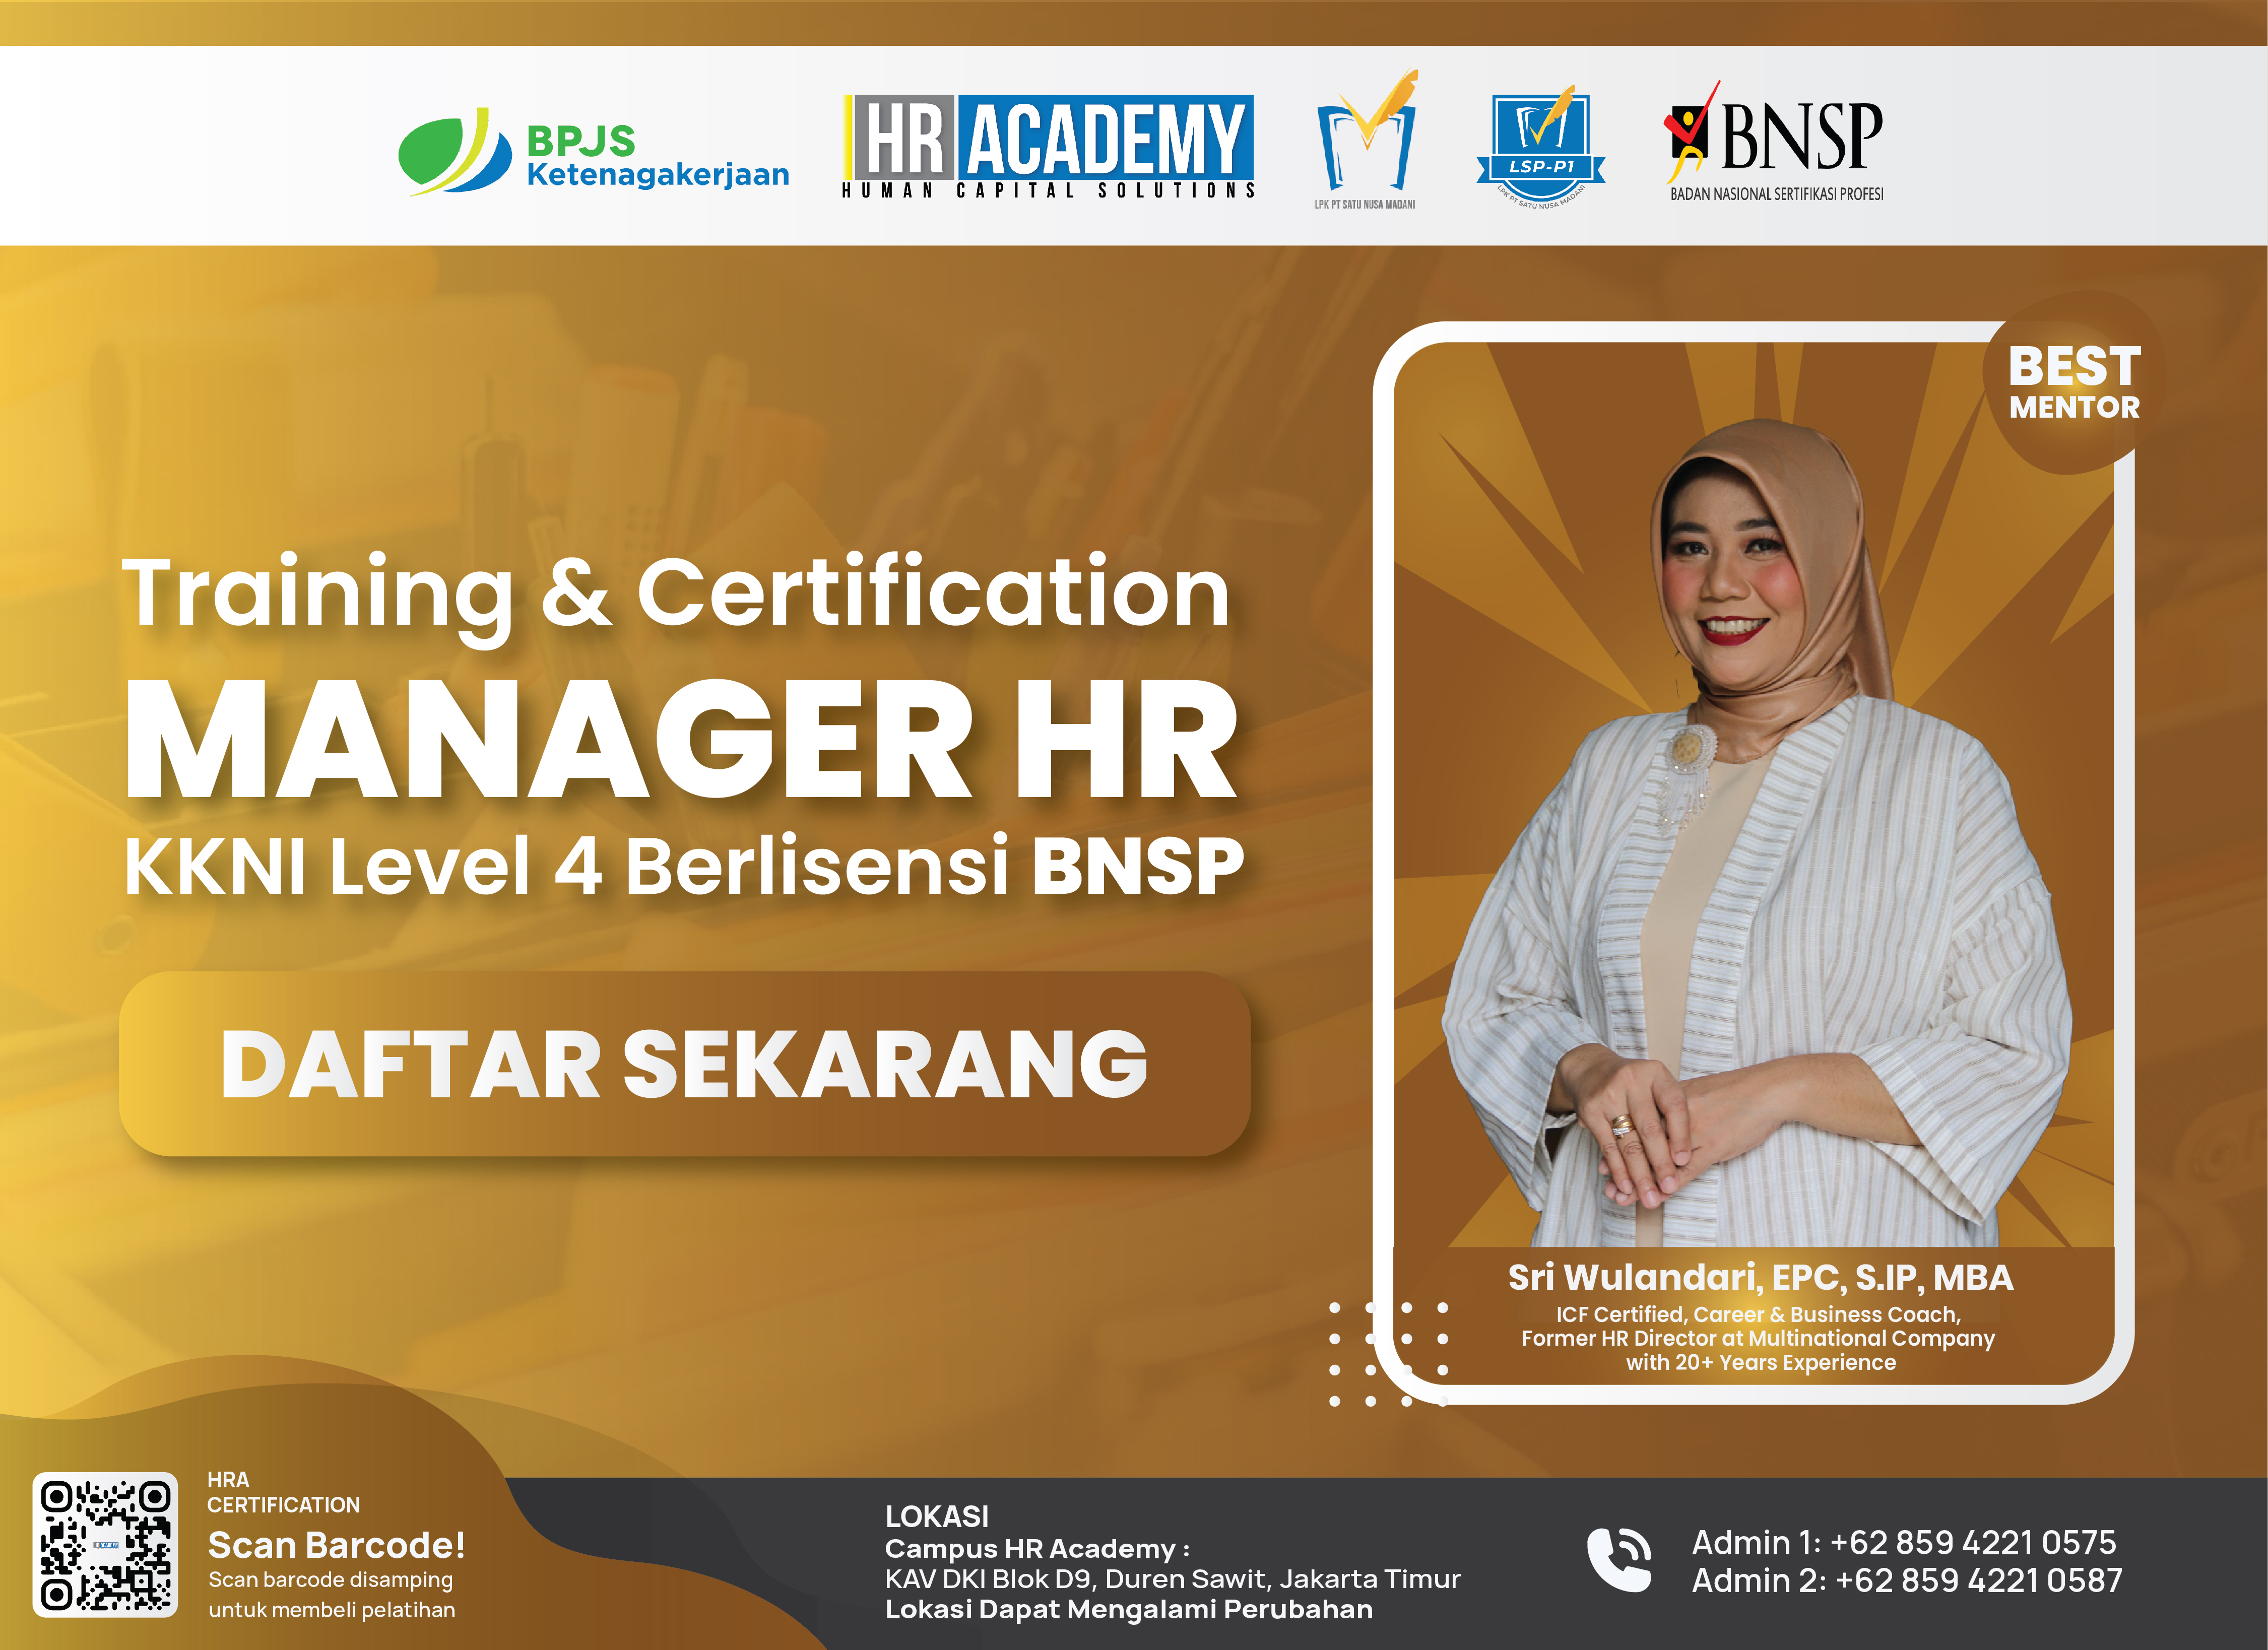 Manager HR